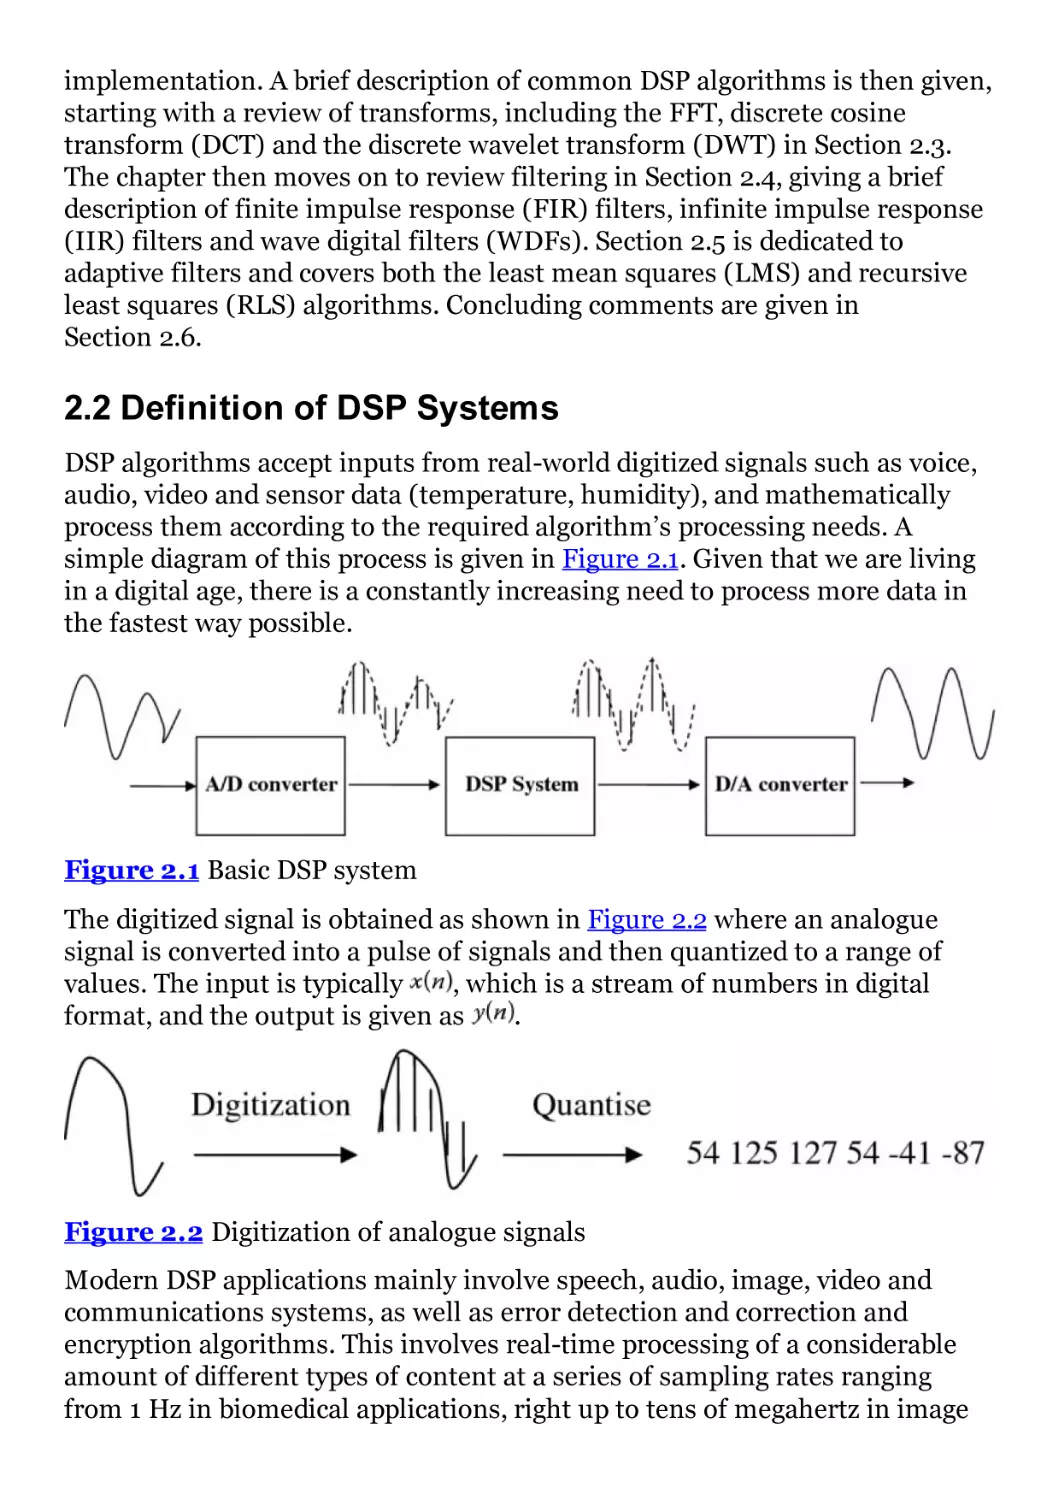 2.2 Definition of DSP Systems